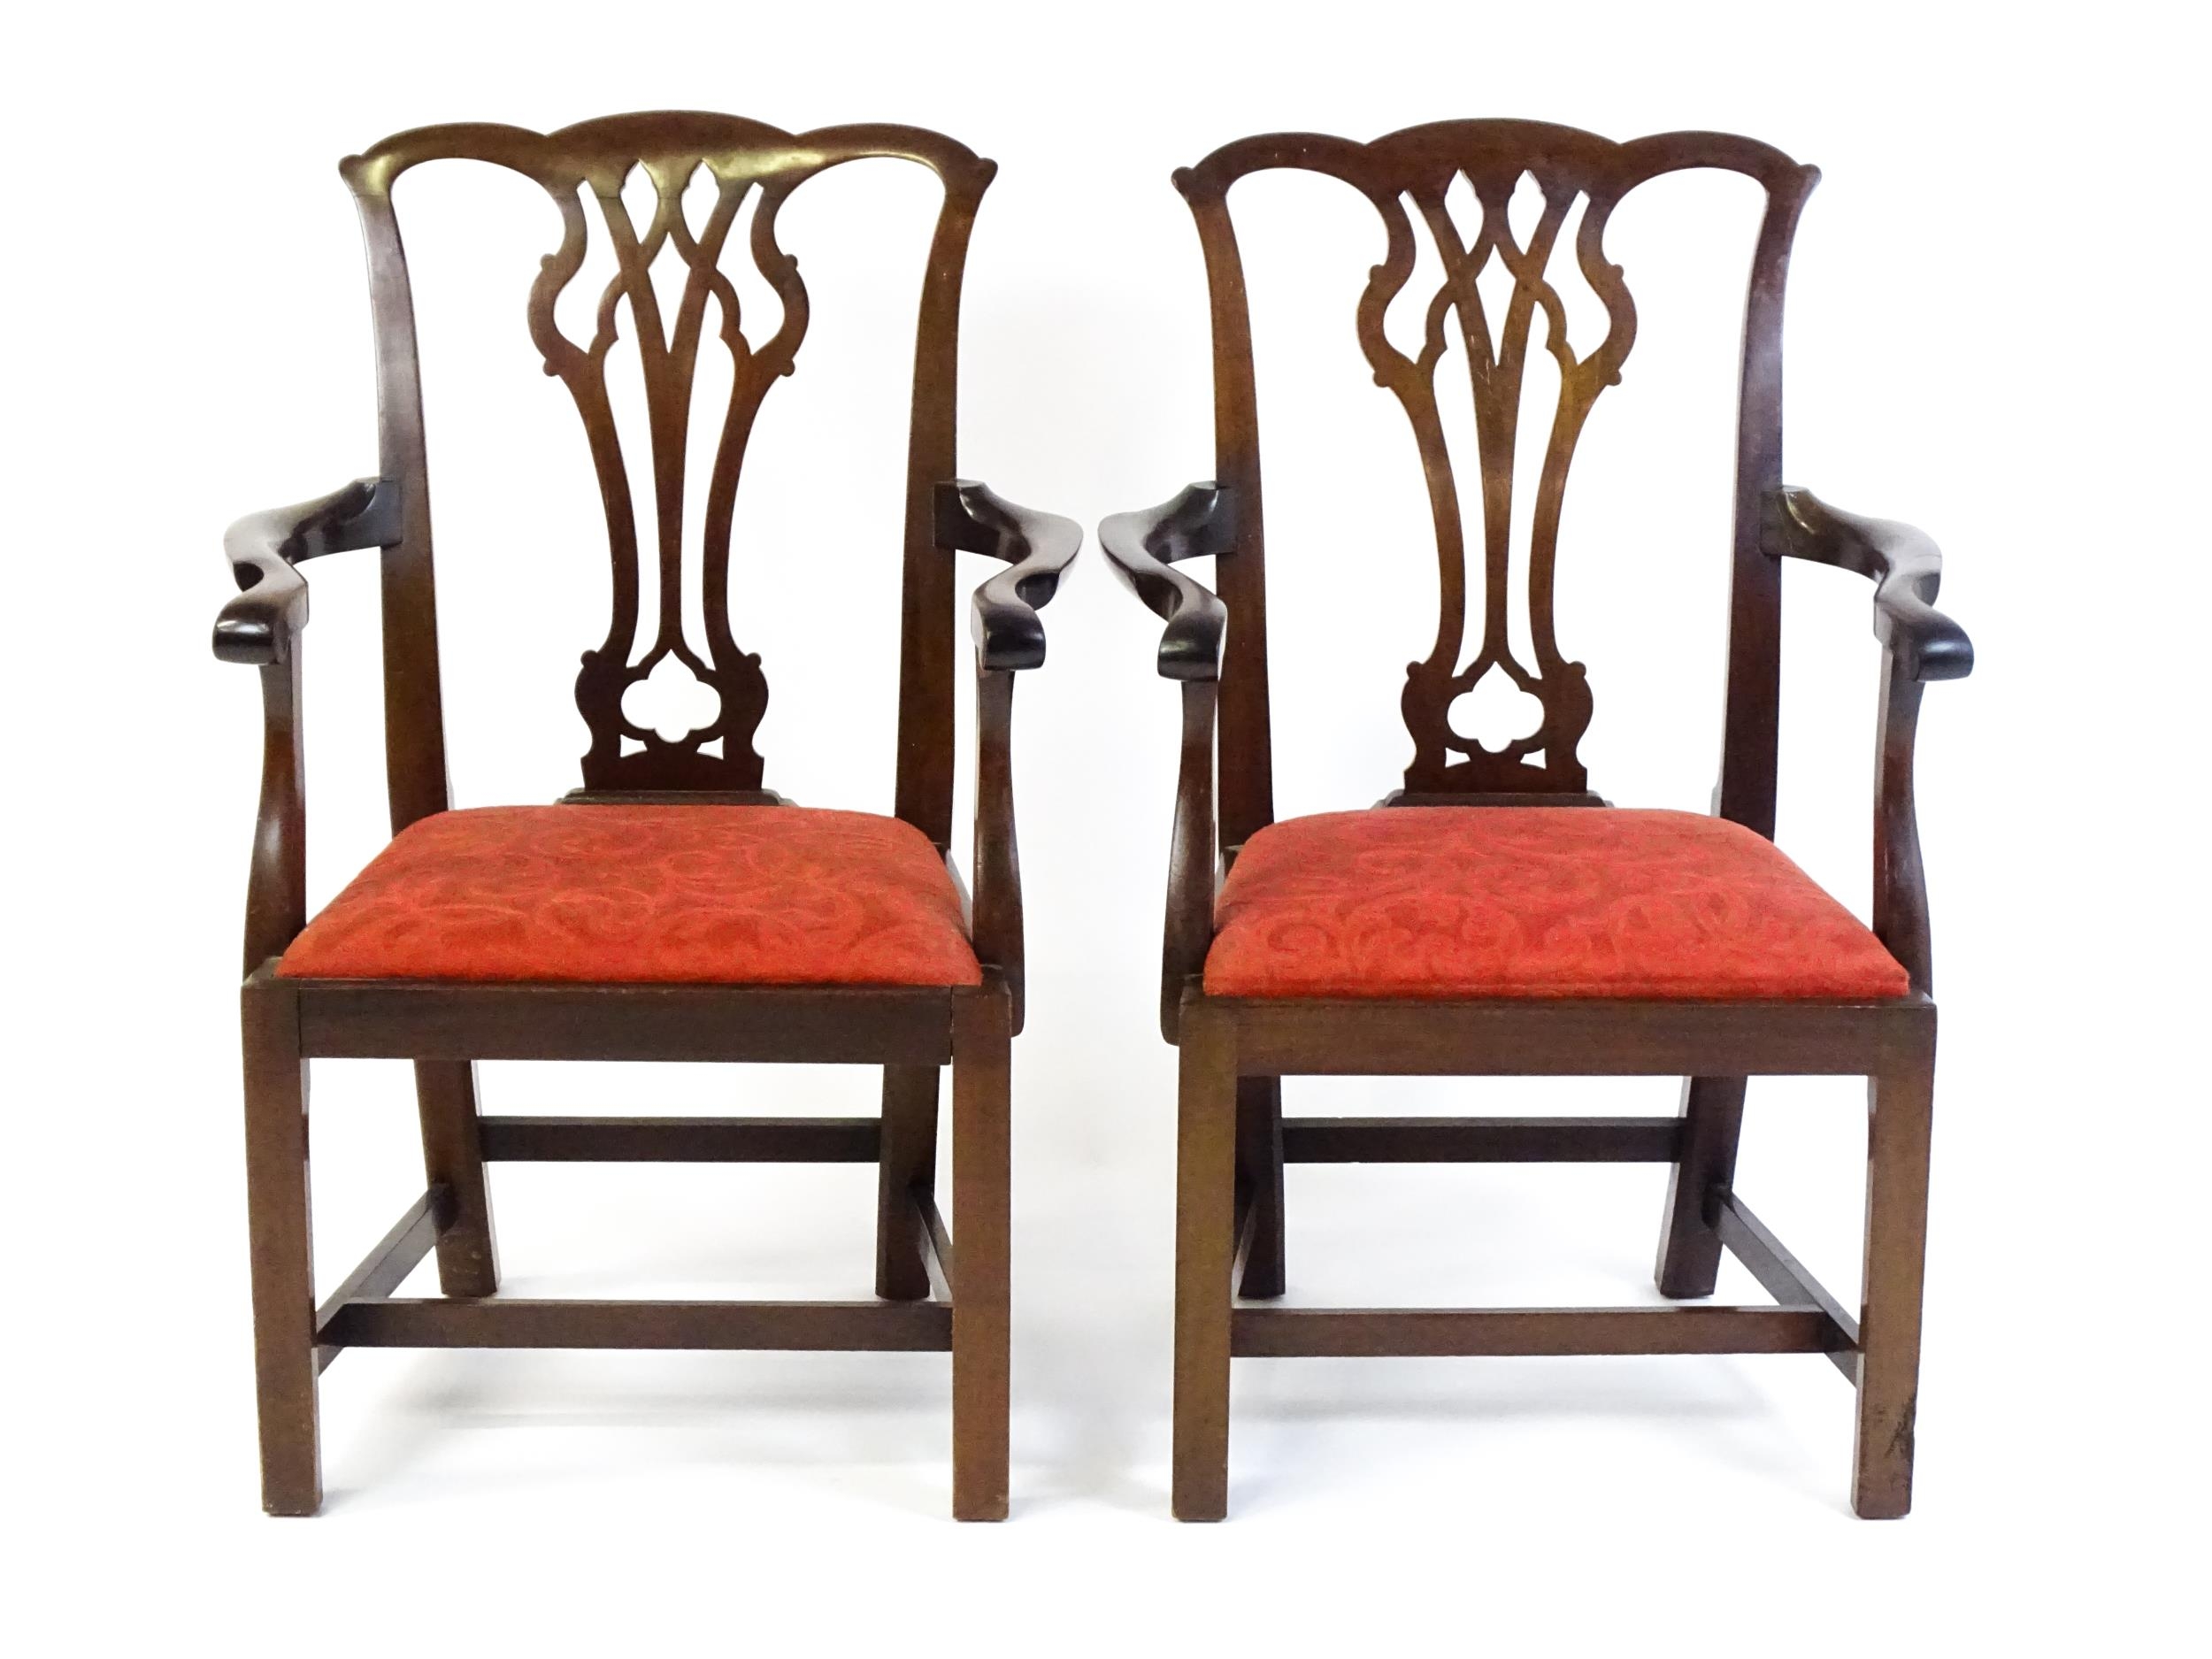 A pair of Chippendale style mahogany elbow chairs with a drop in seat raised on chamfered legs - Image 5 of 7